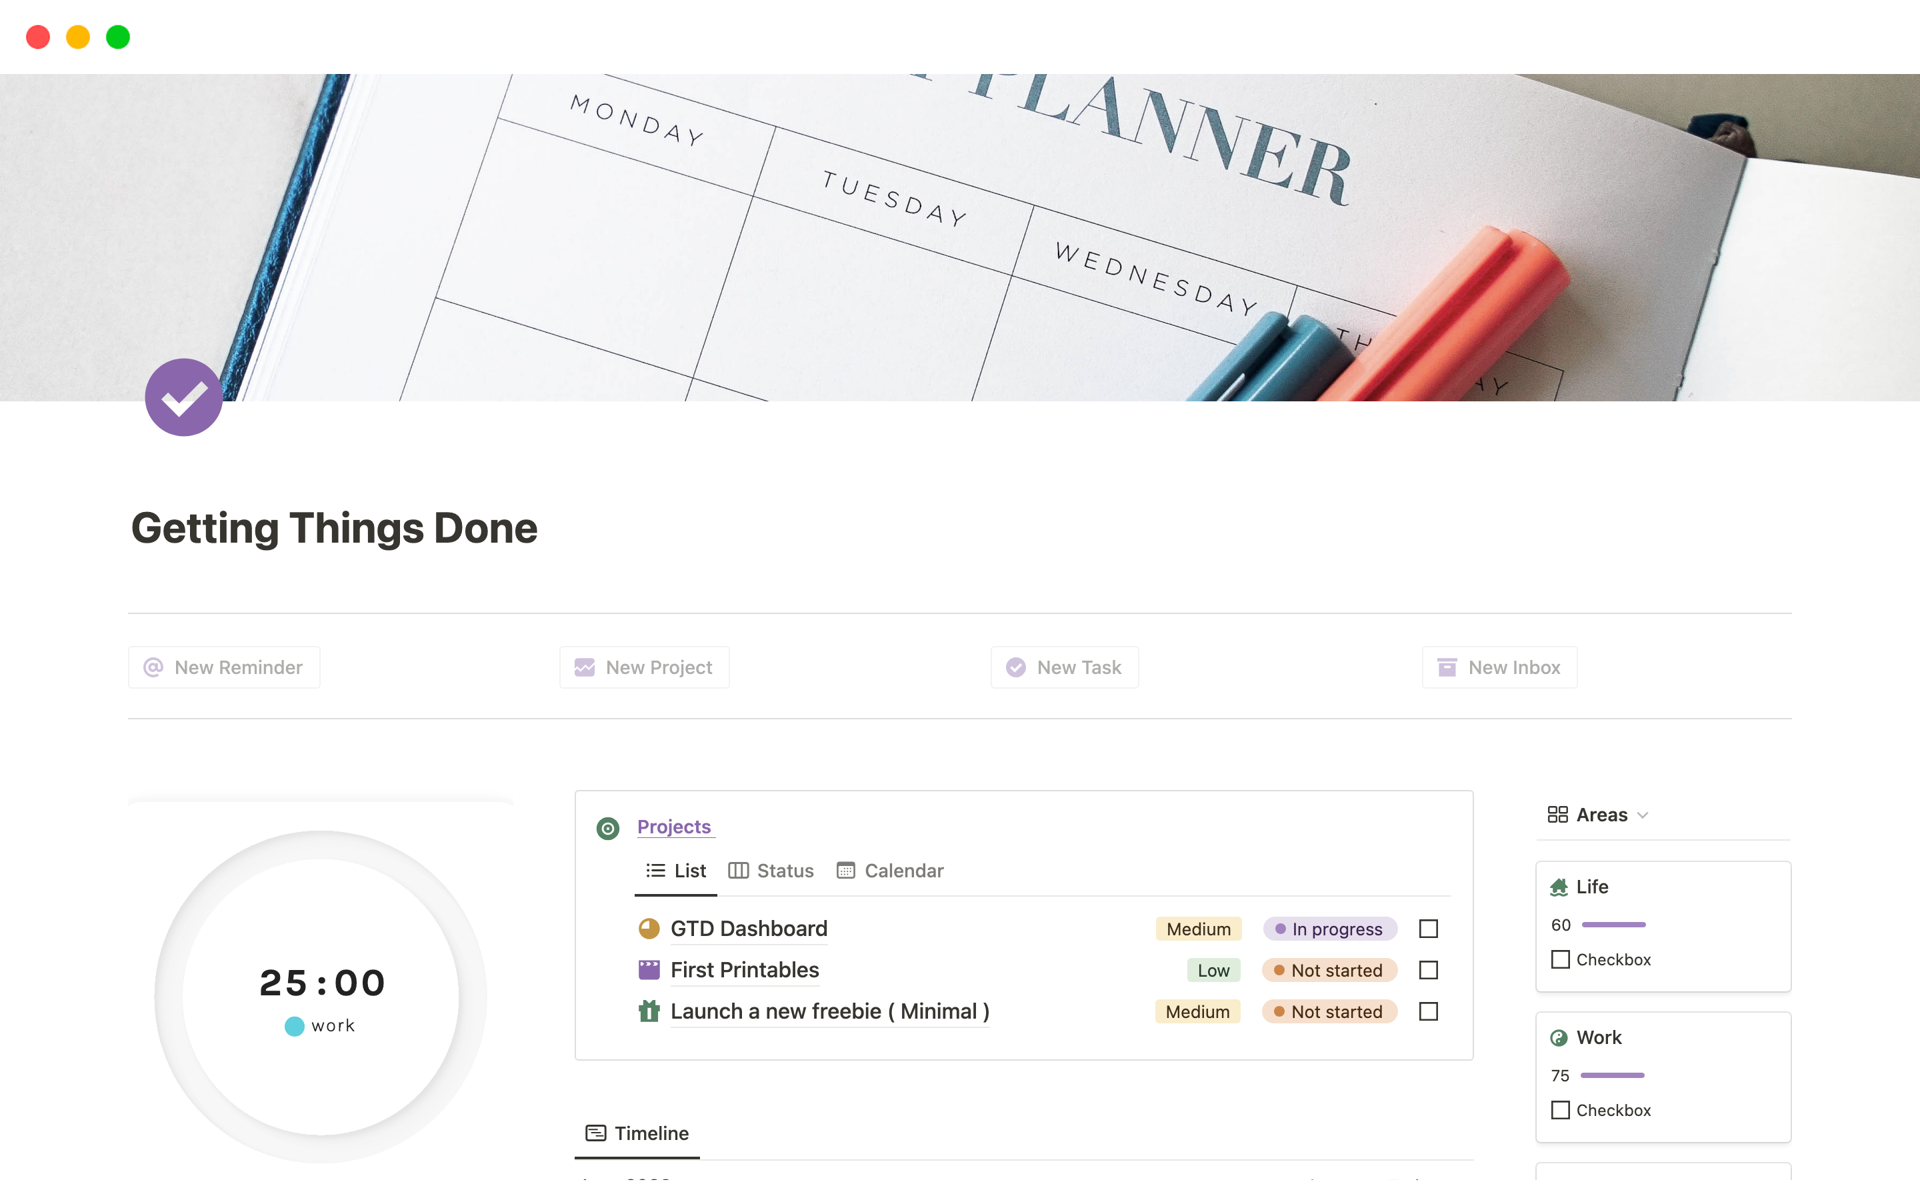 In the Get Things Done template, you can manage your tasks and projects and complete them on time. 